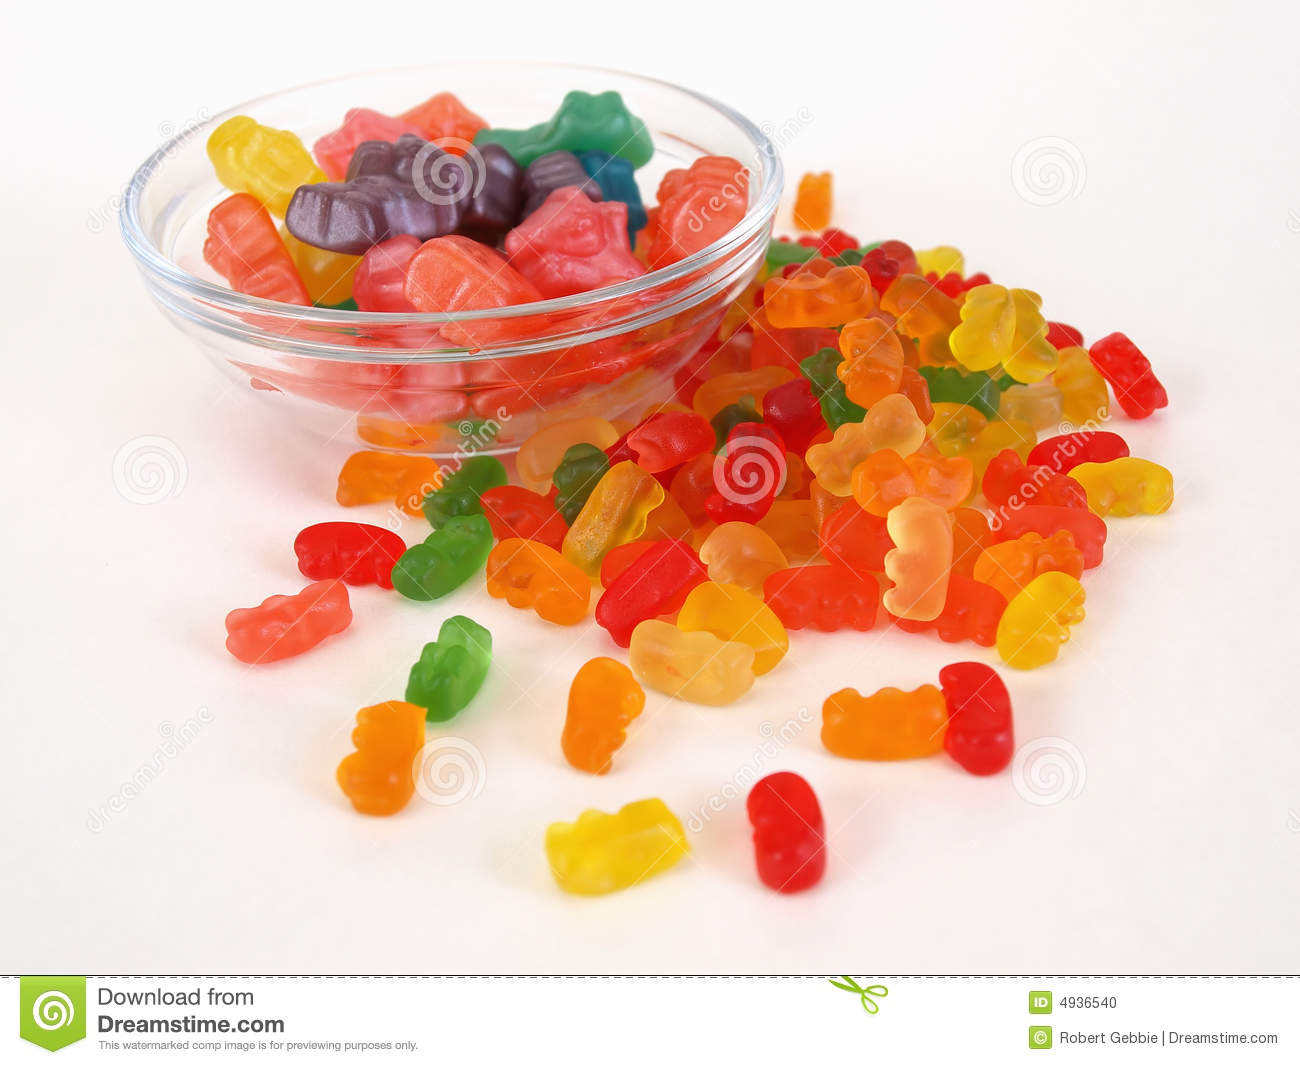 Gummy Bear Shaped Candies In And Out Of A Clear Glass Dish Over A